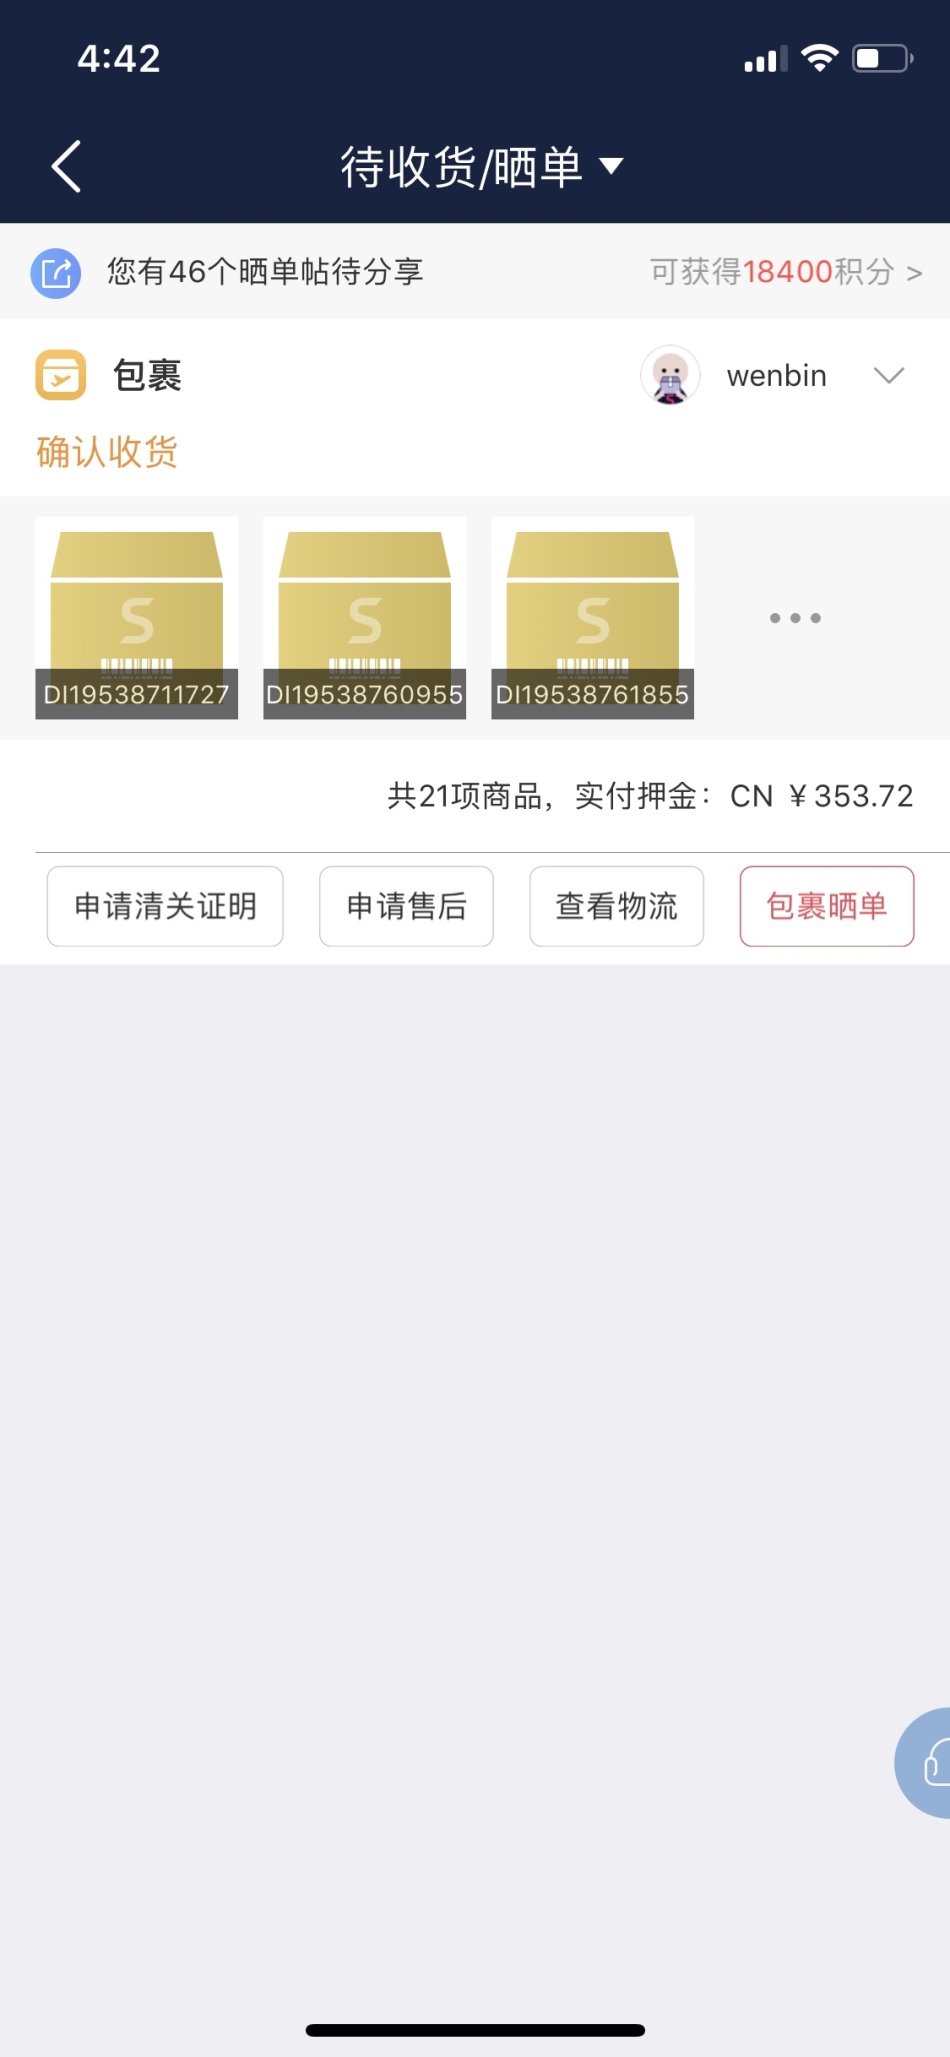 https://img1.superbuy.com/images/consult/2019/03/29/5bf66b89bc649330f364f77ca42fd8be.jpg?x-oss-process=image/resize,w_950